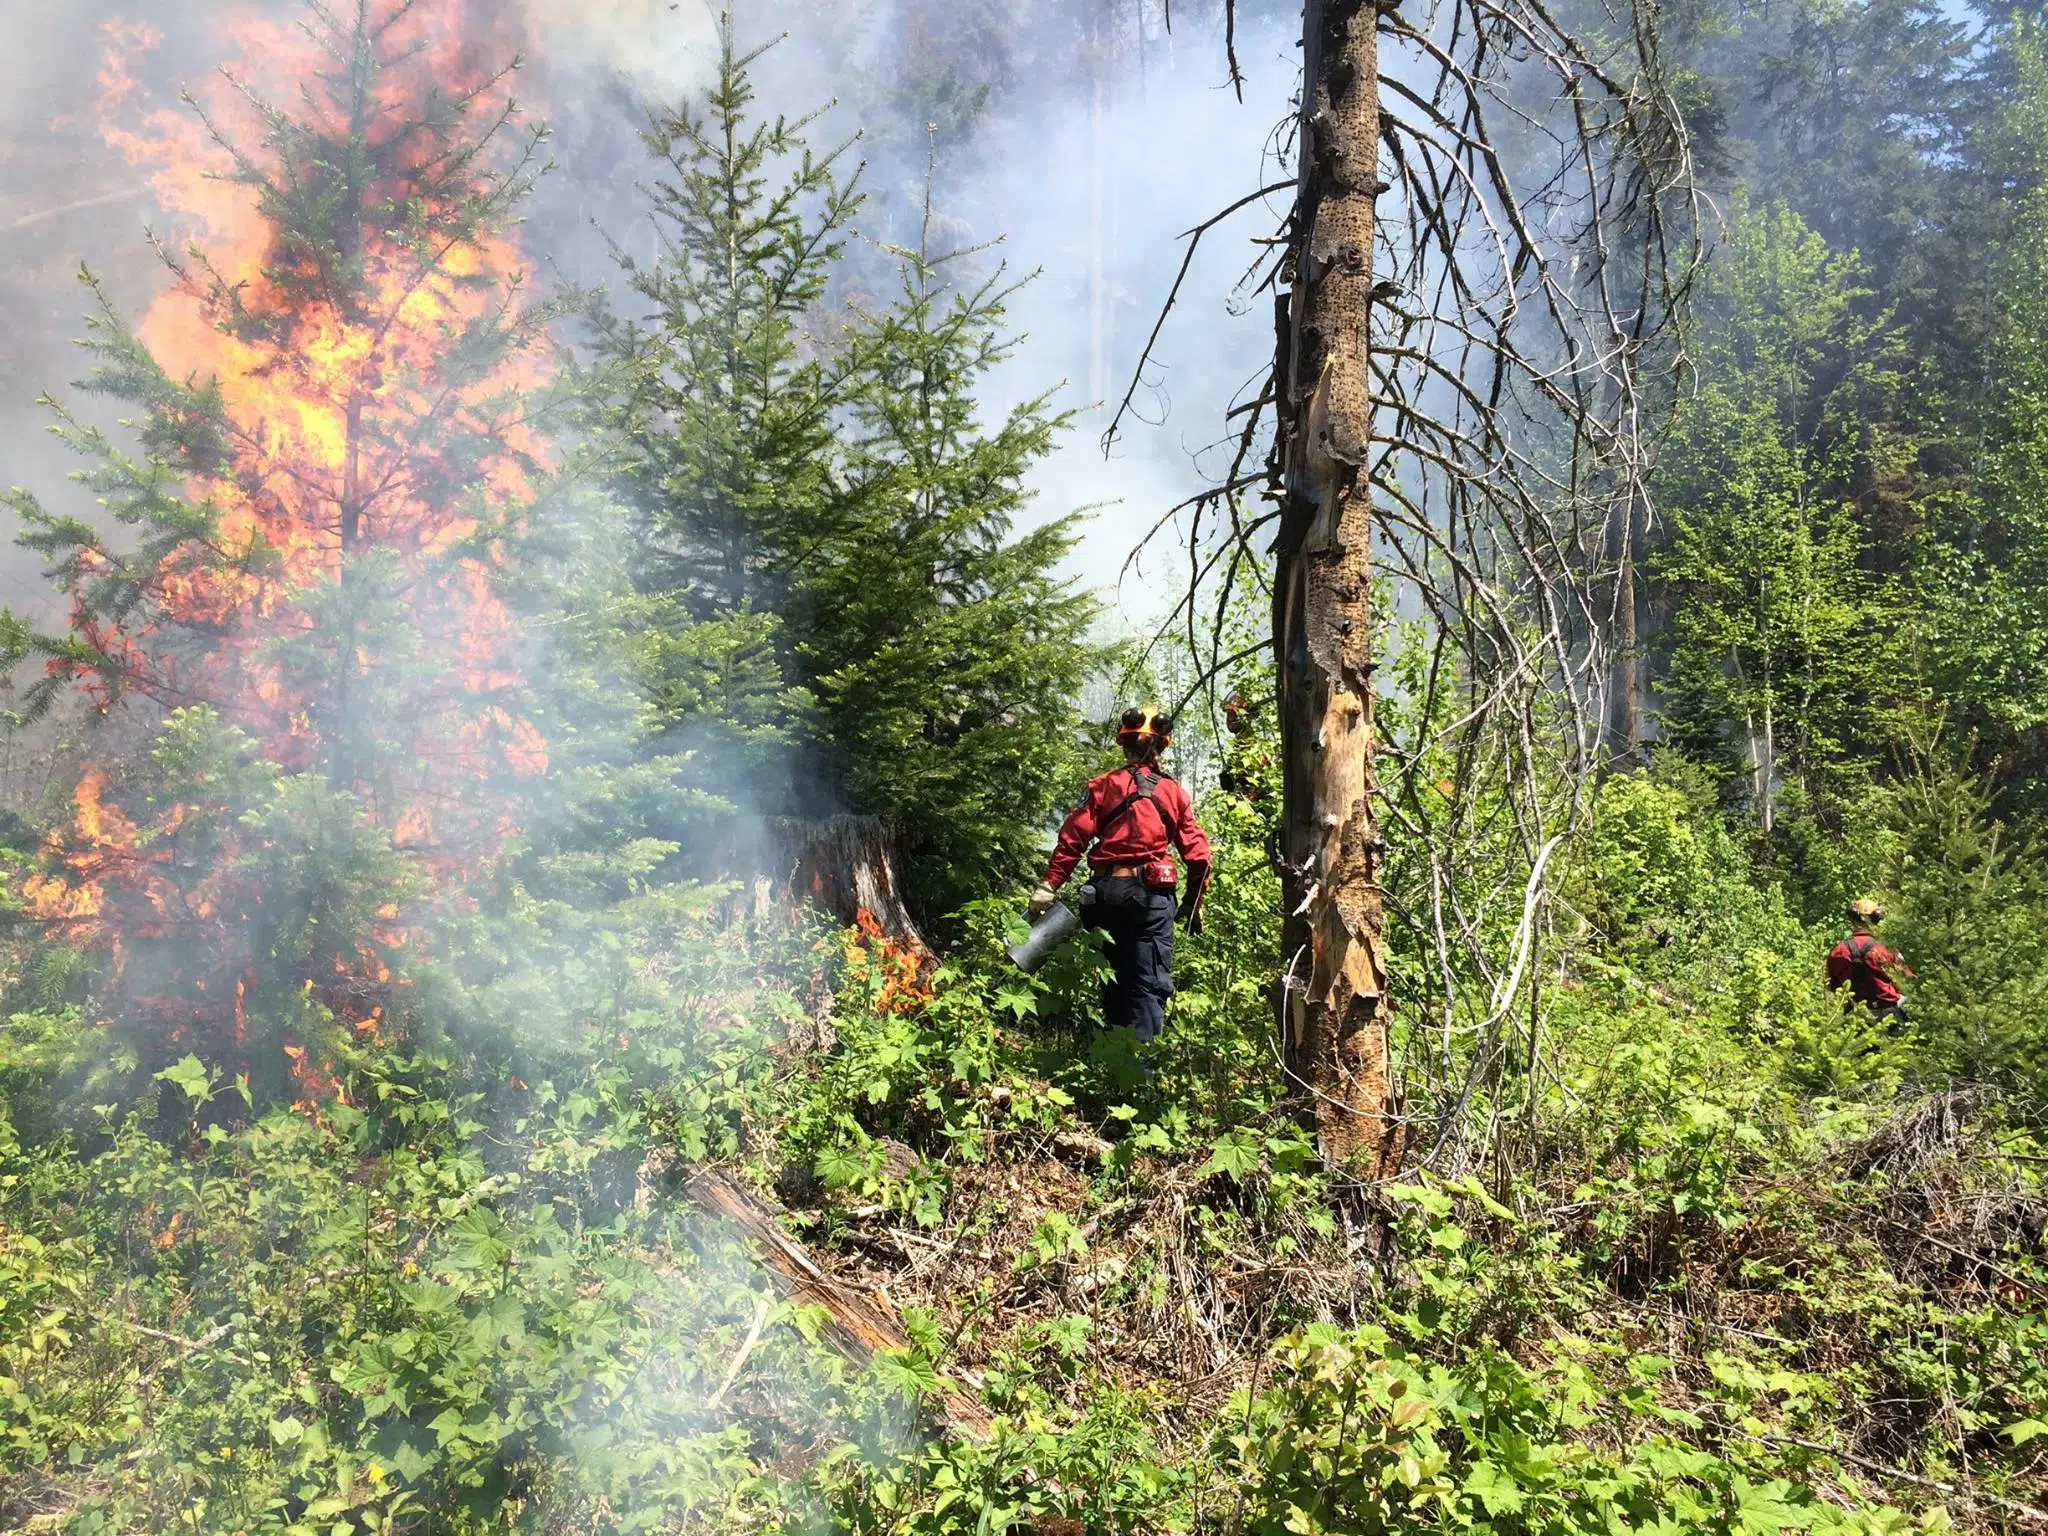 Wildfire crews optimistic as favourable weather conditions forecast for the weekend